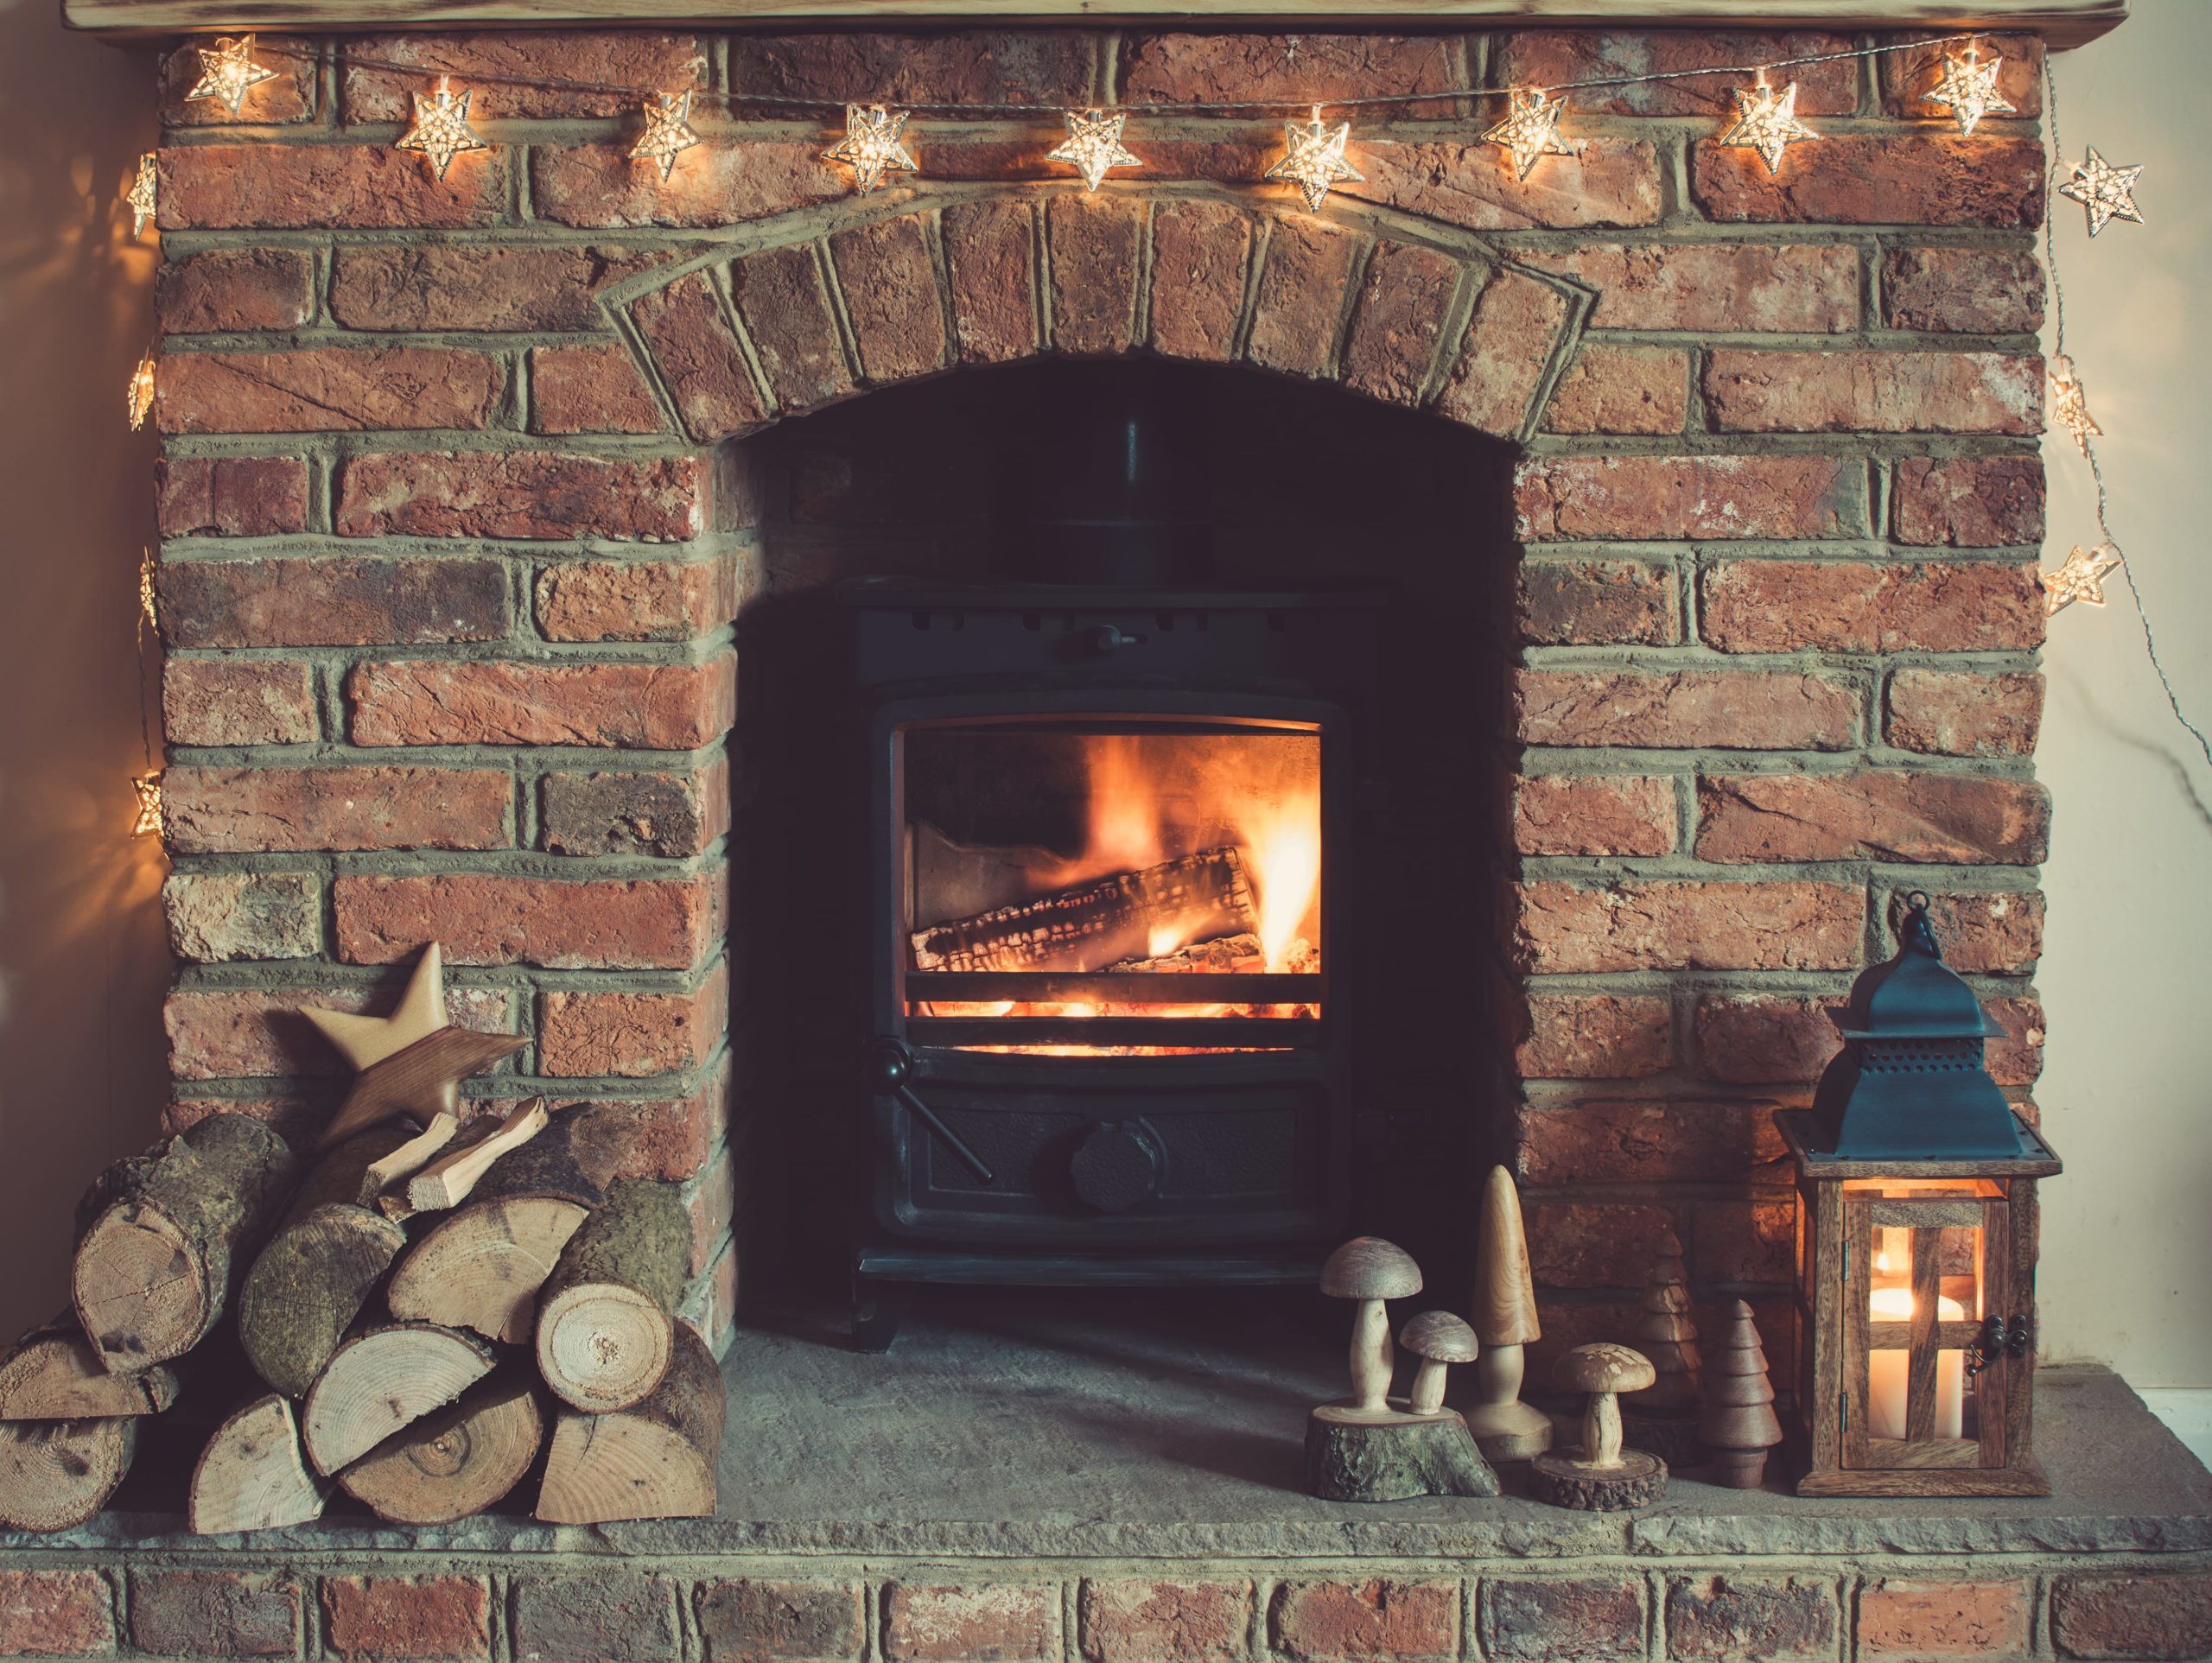 Log burner fireplace with burning logs on open fire